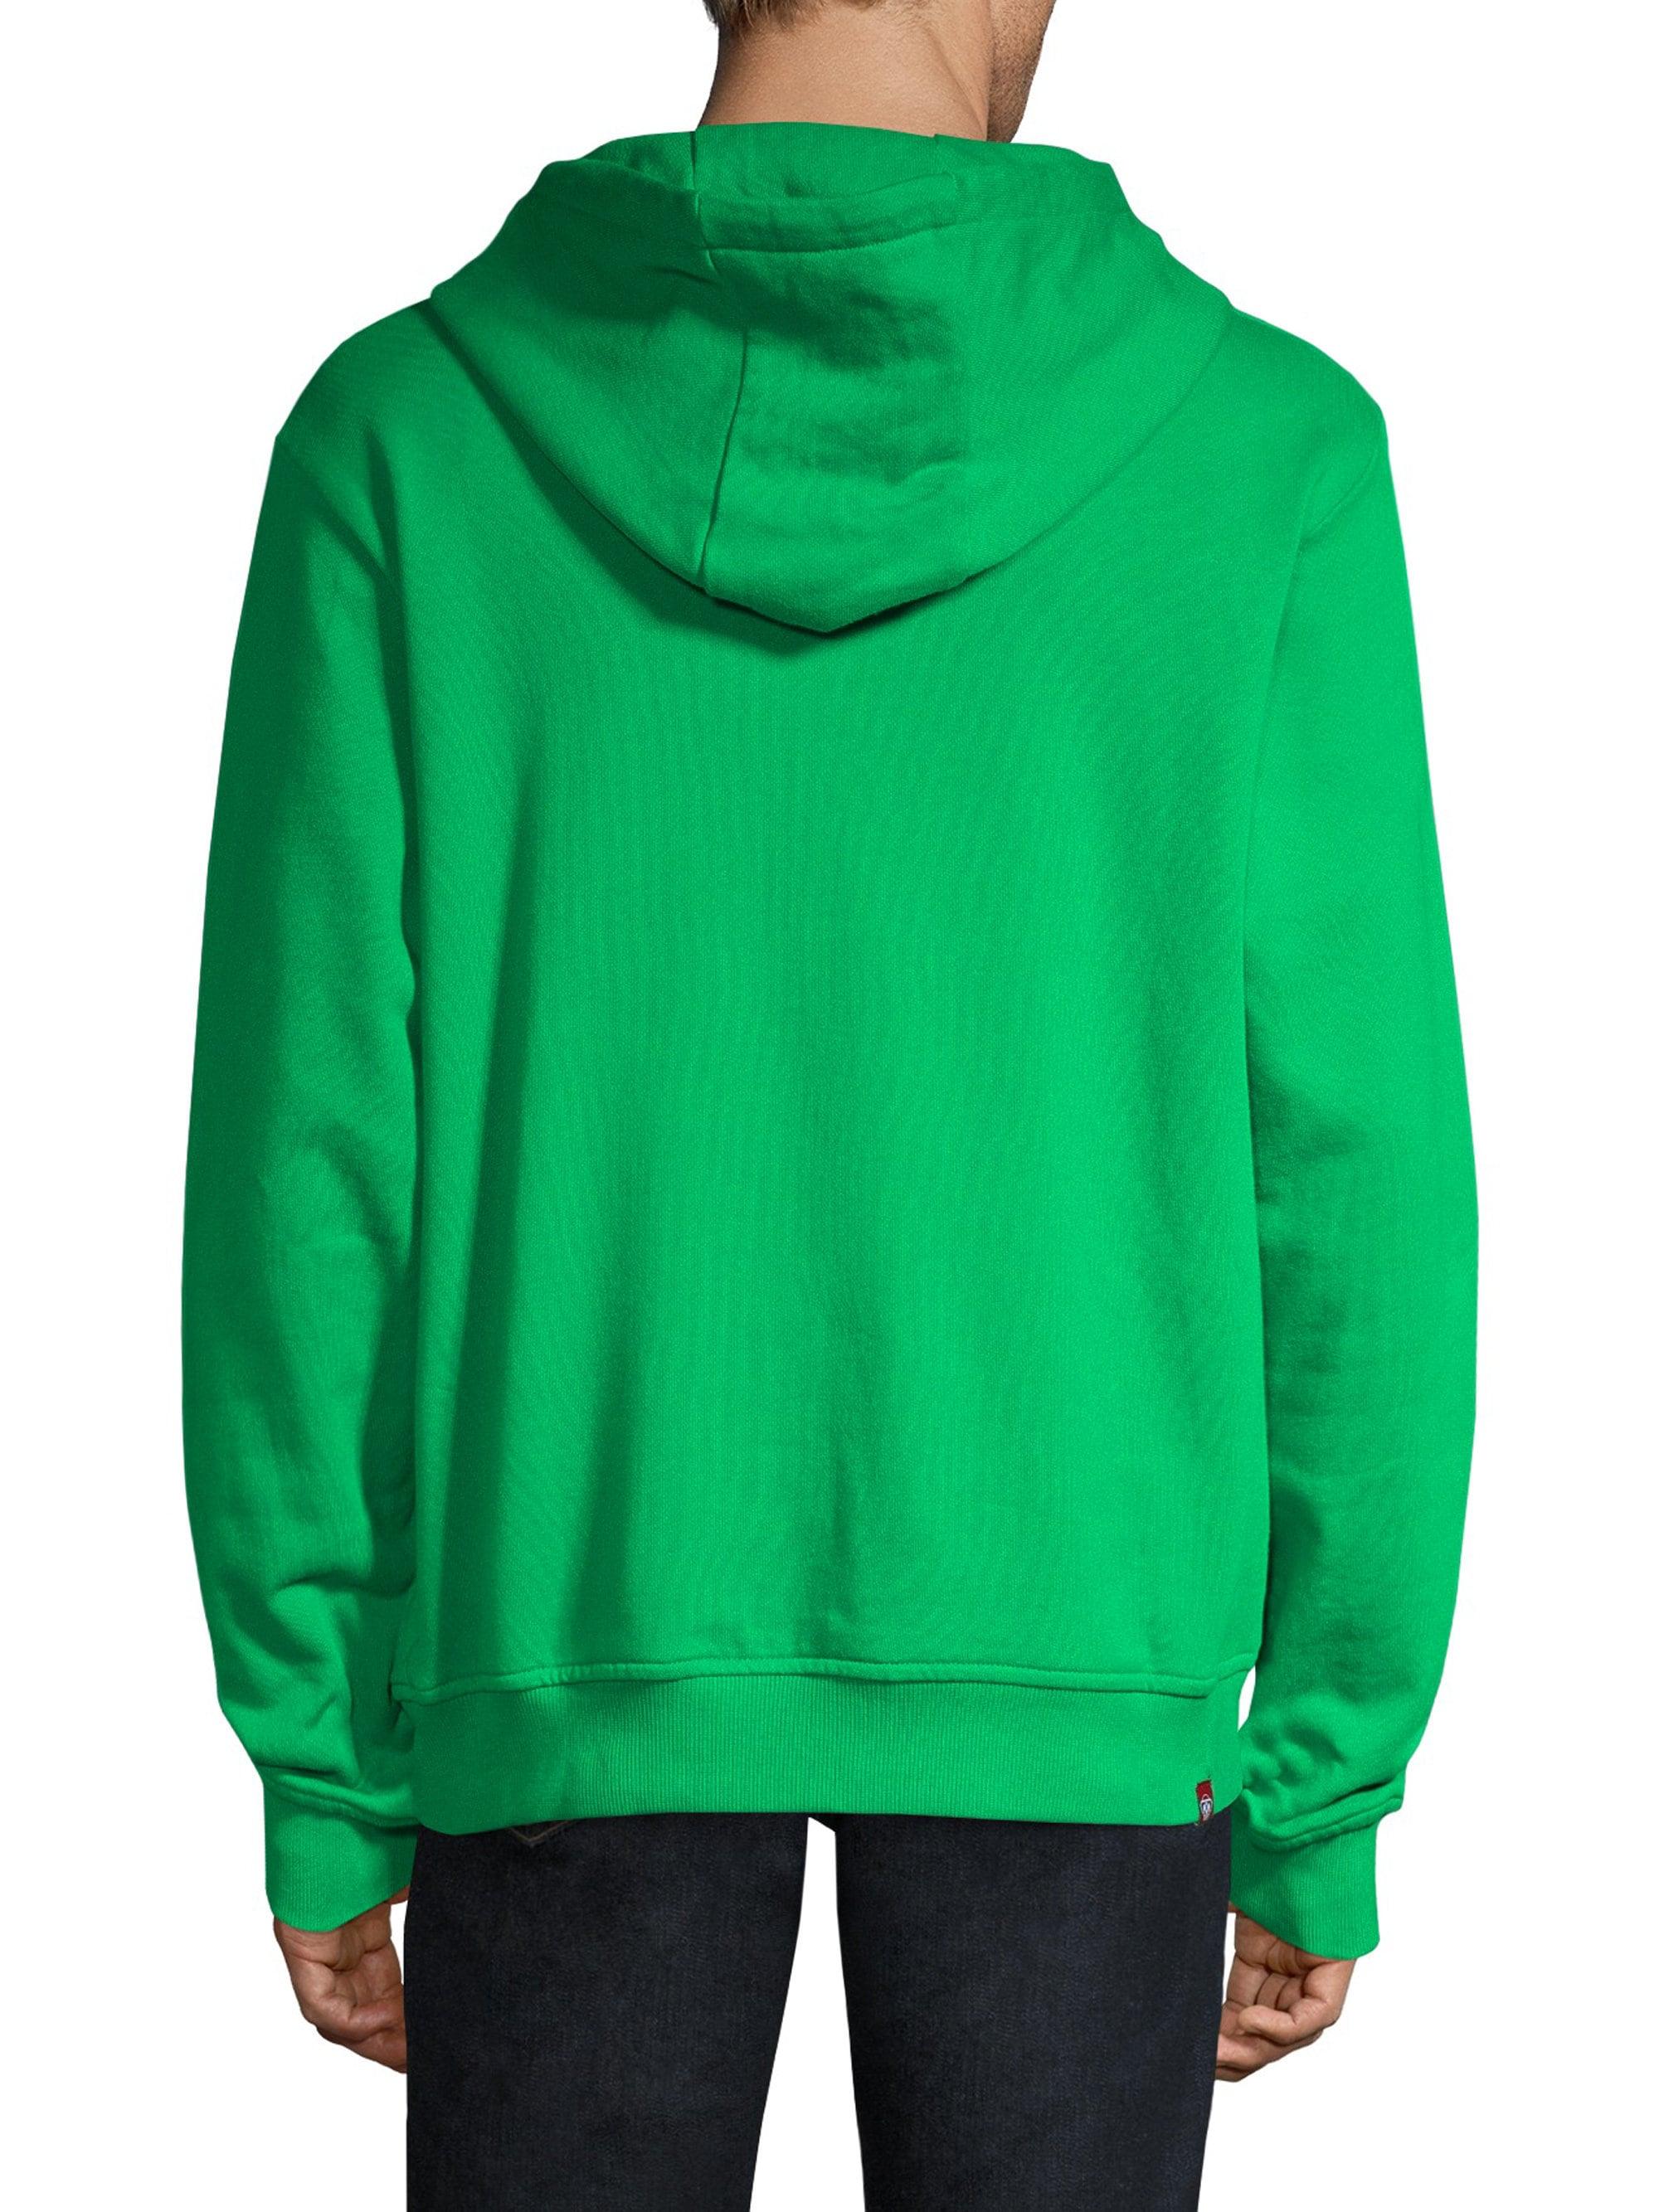 Lyst - Mostly Heard Rarely Seen Men's Knock Out Graphic Hoodie - Green ...